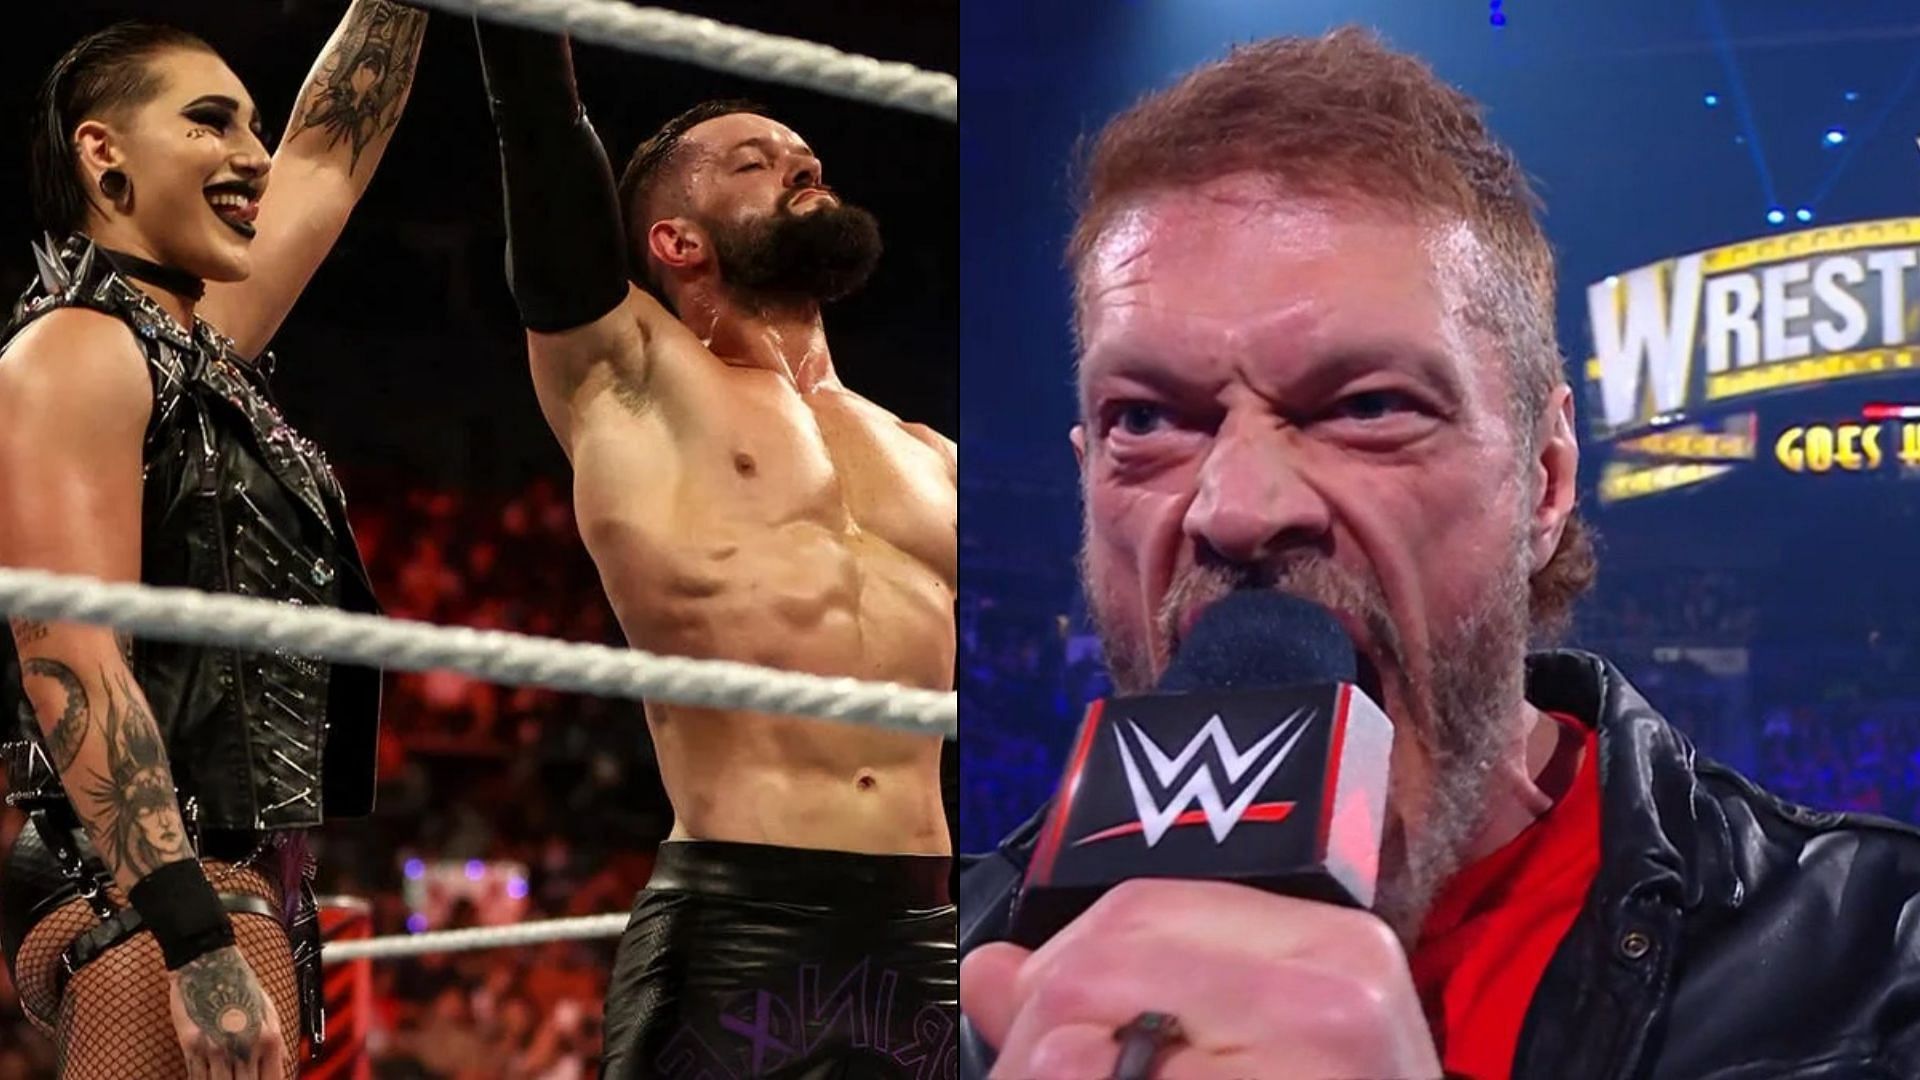 Finn Balor and Edge will enter Hell in a Cell at WrestleMania 39